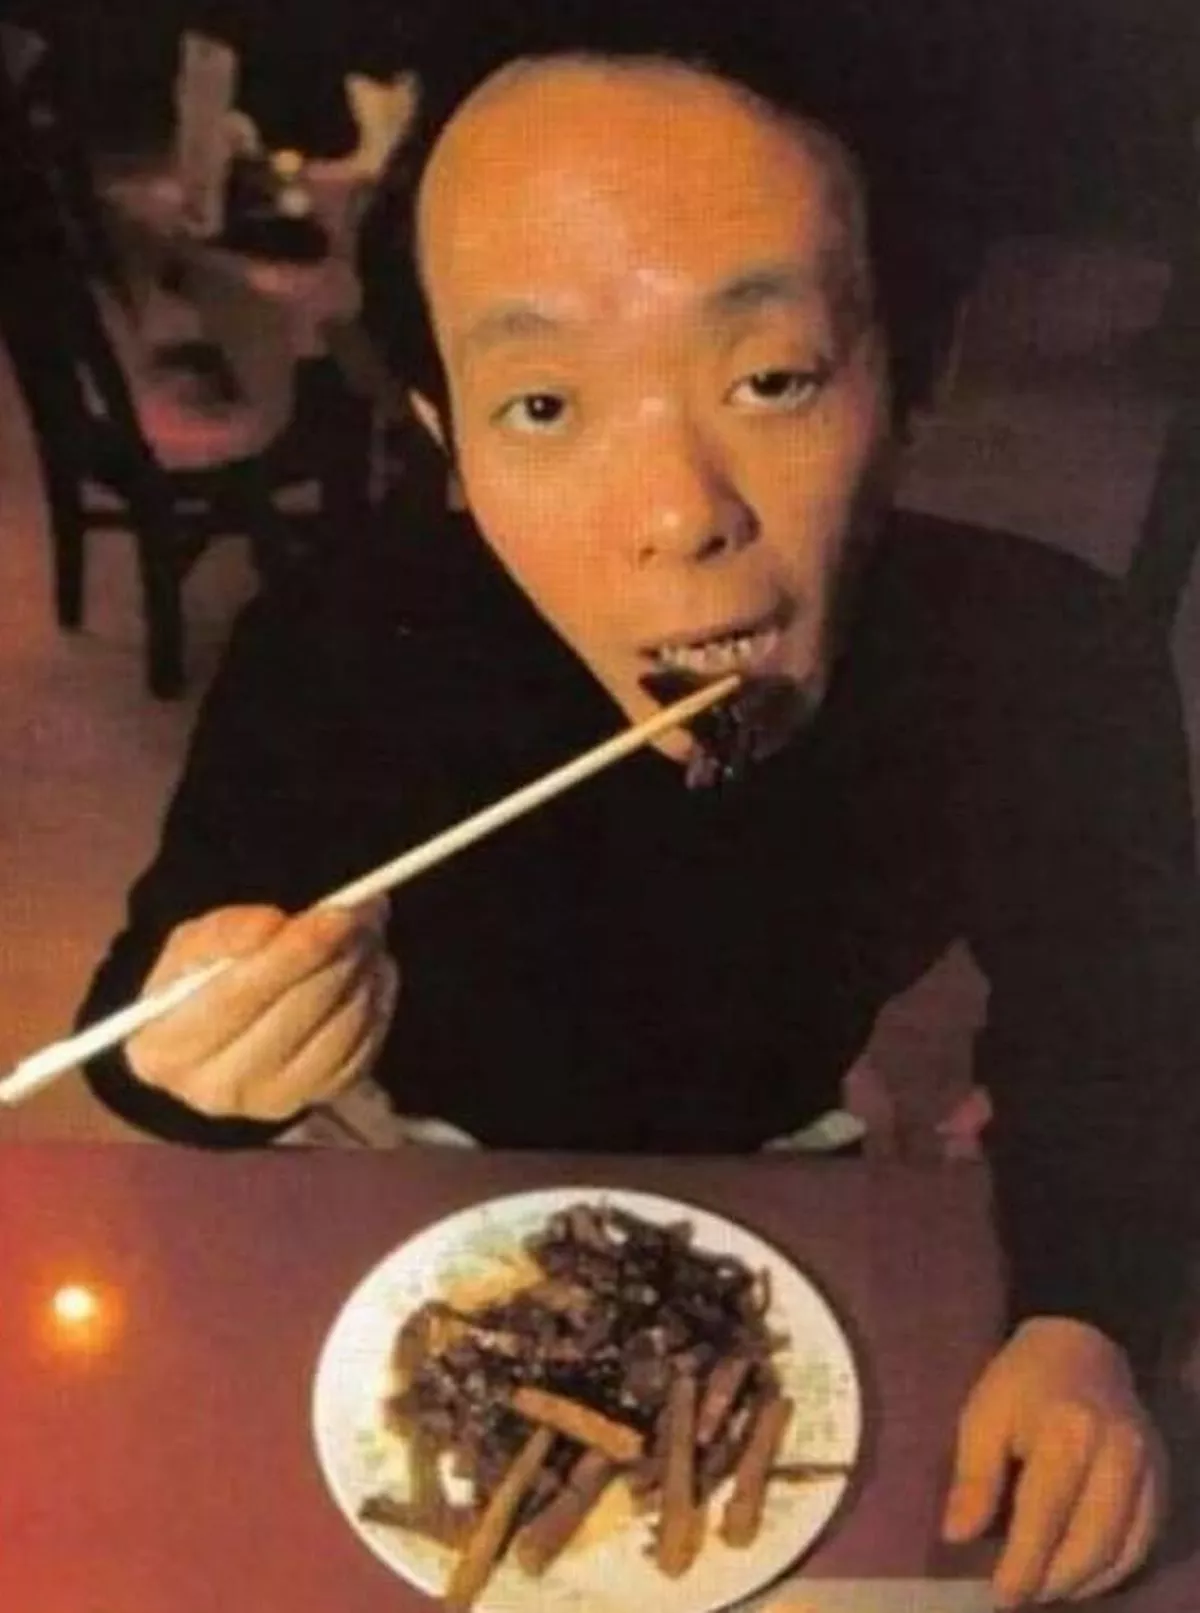 Issei Sagawa Kobe Cannibal invited a friend for dinner and ate her